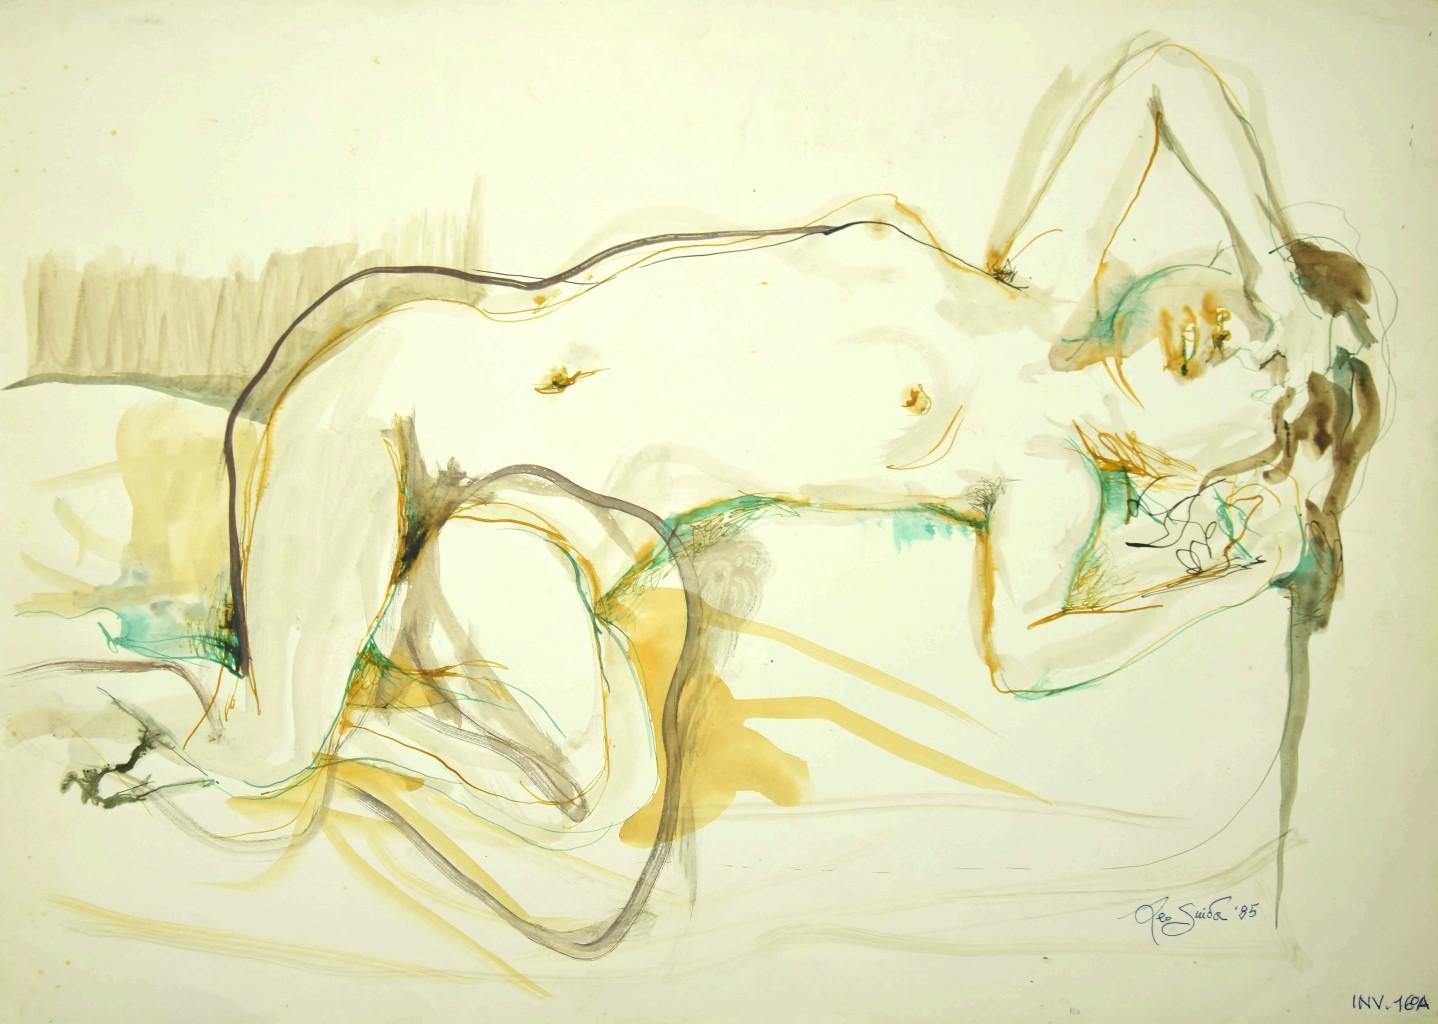 Nude of Woman -  Ink and Watercolor on Paper by Leo Guida - 1985